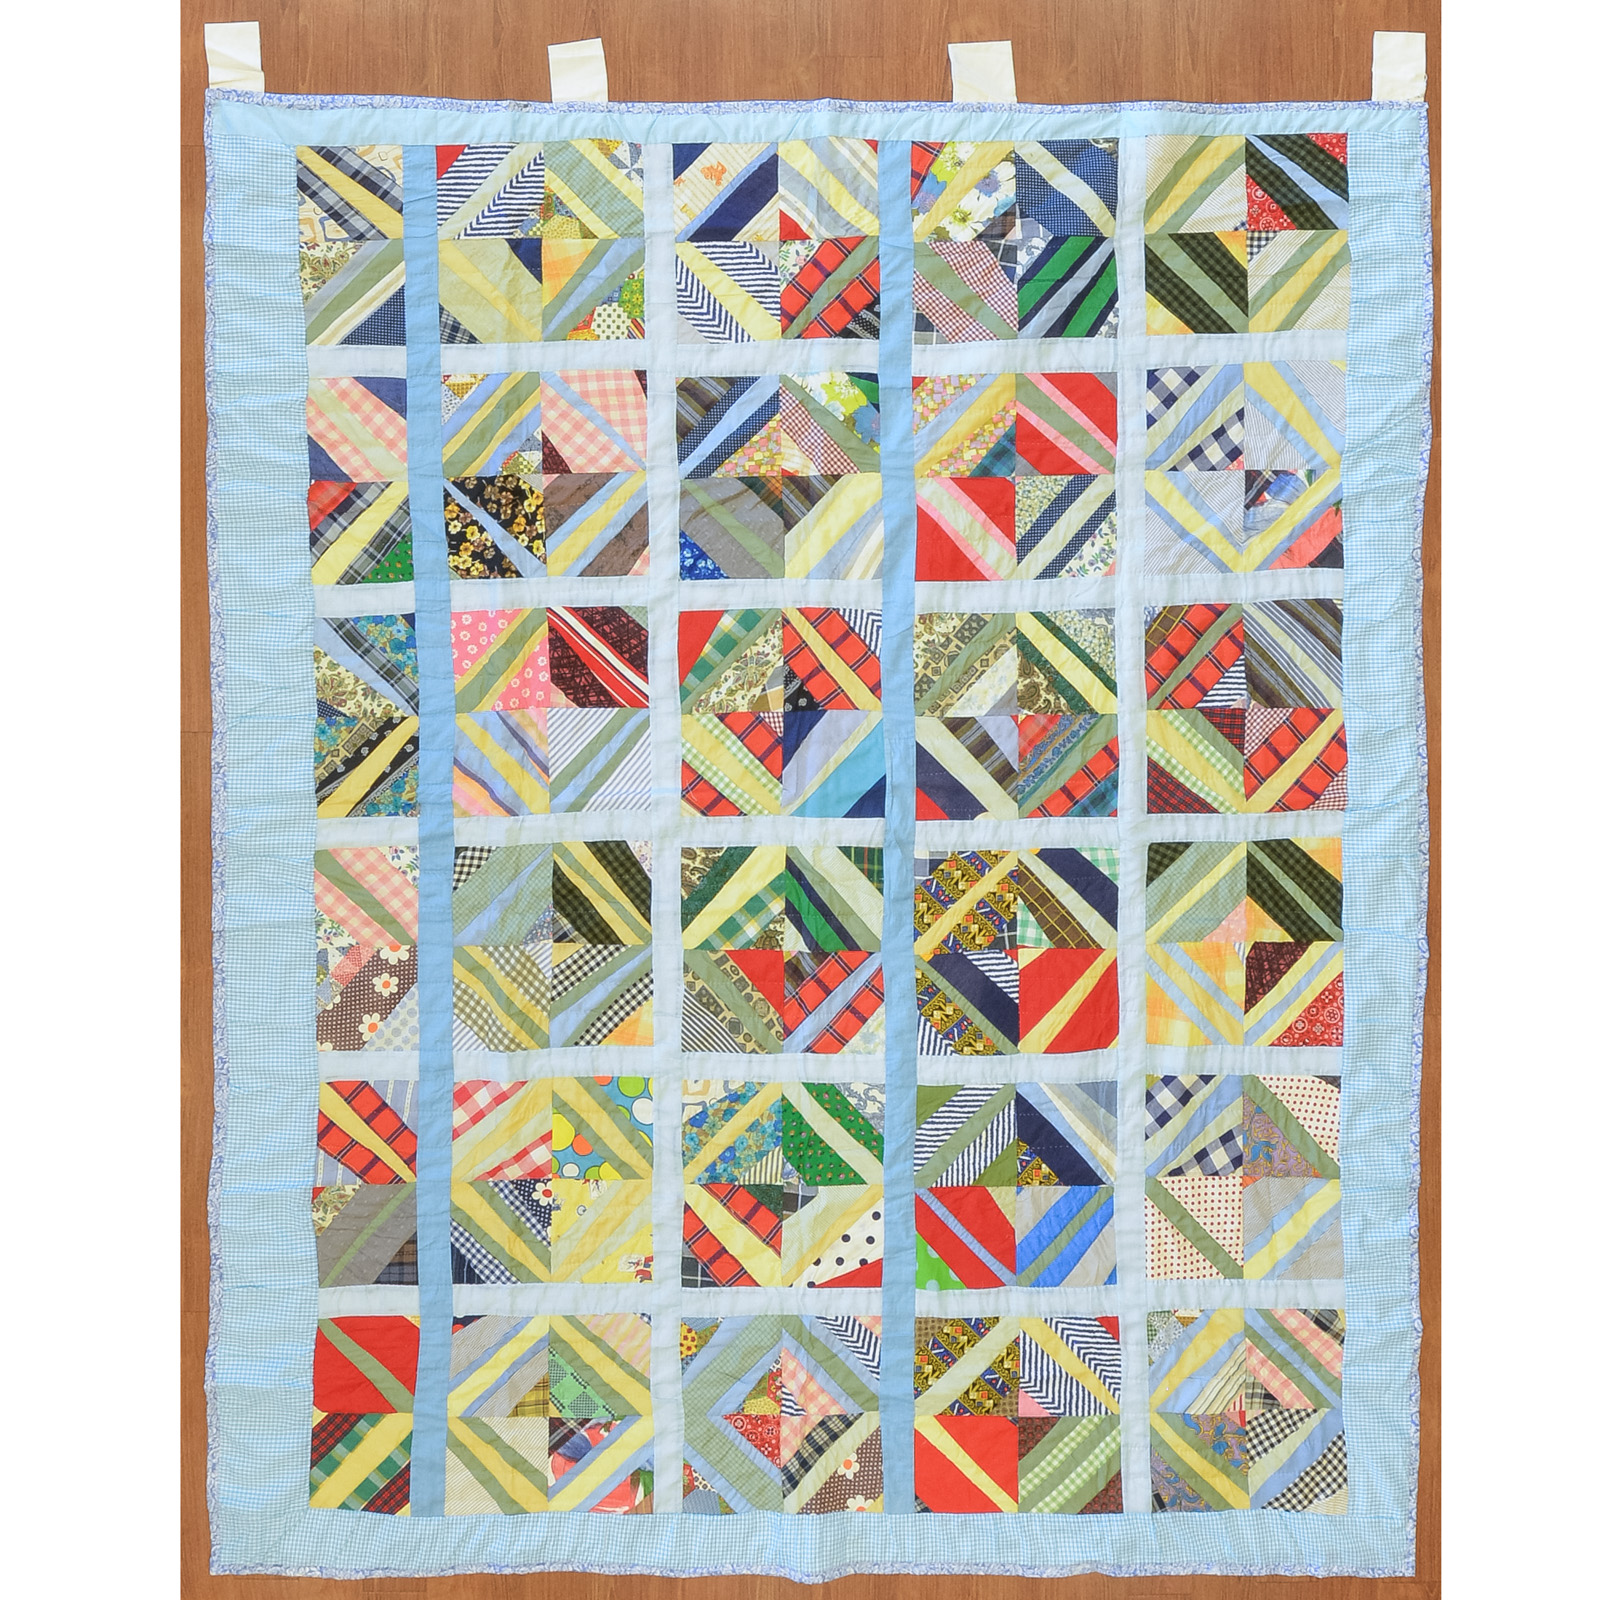 HAND STITCHED PATCHWORK QUILT In 2eaf1a